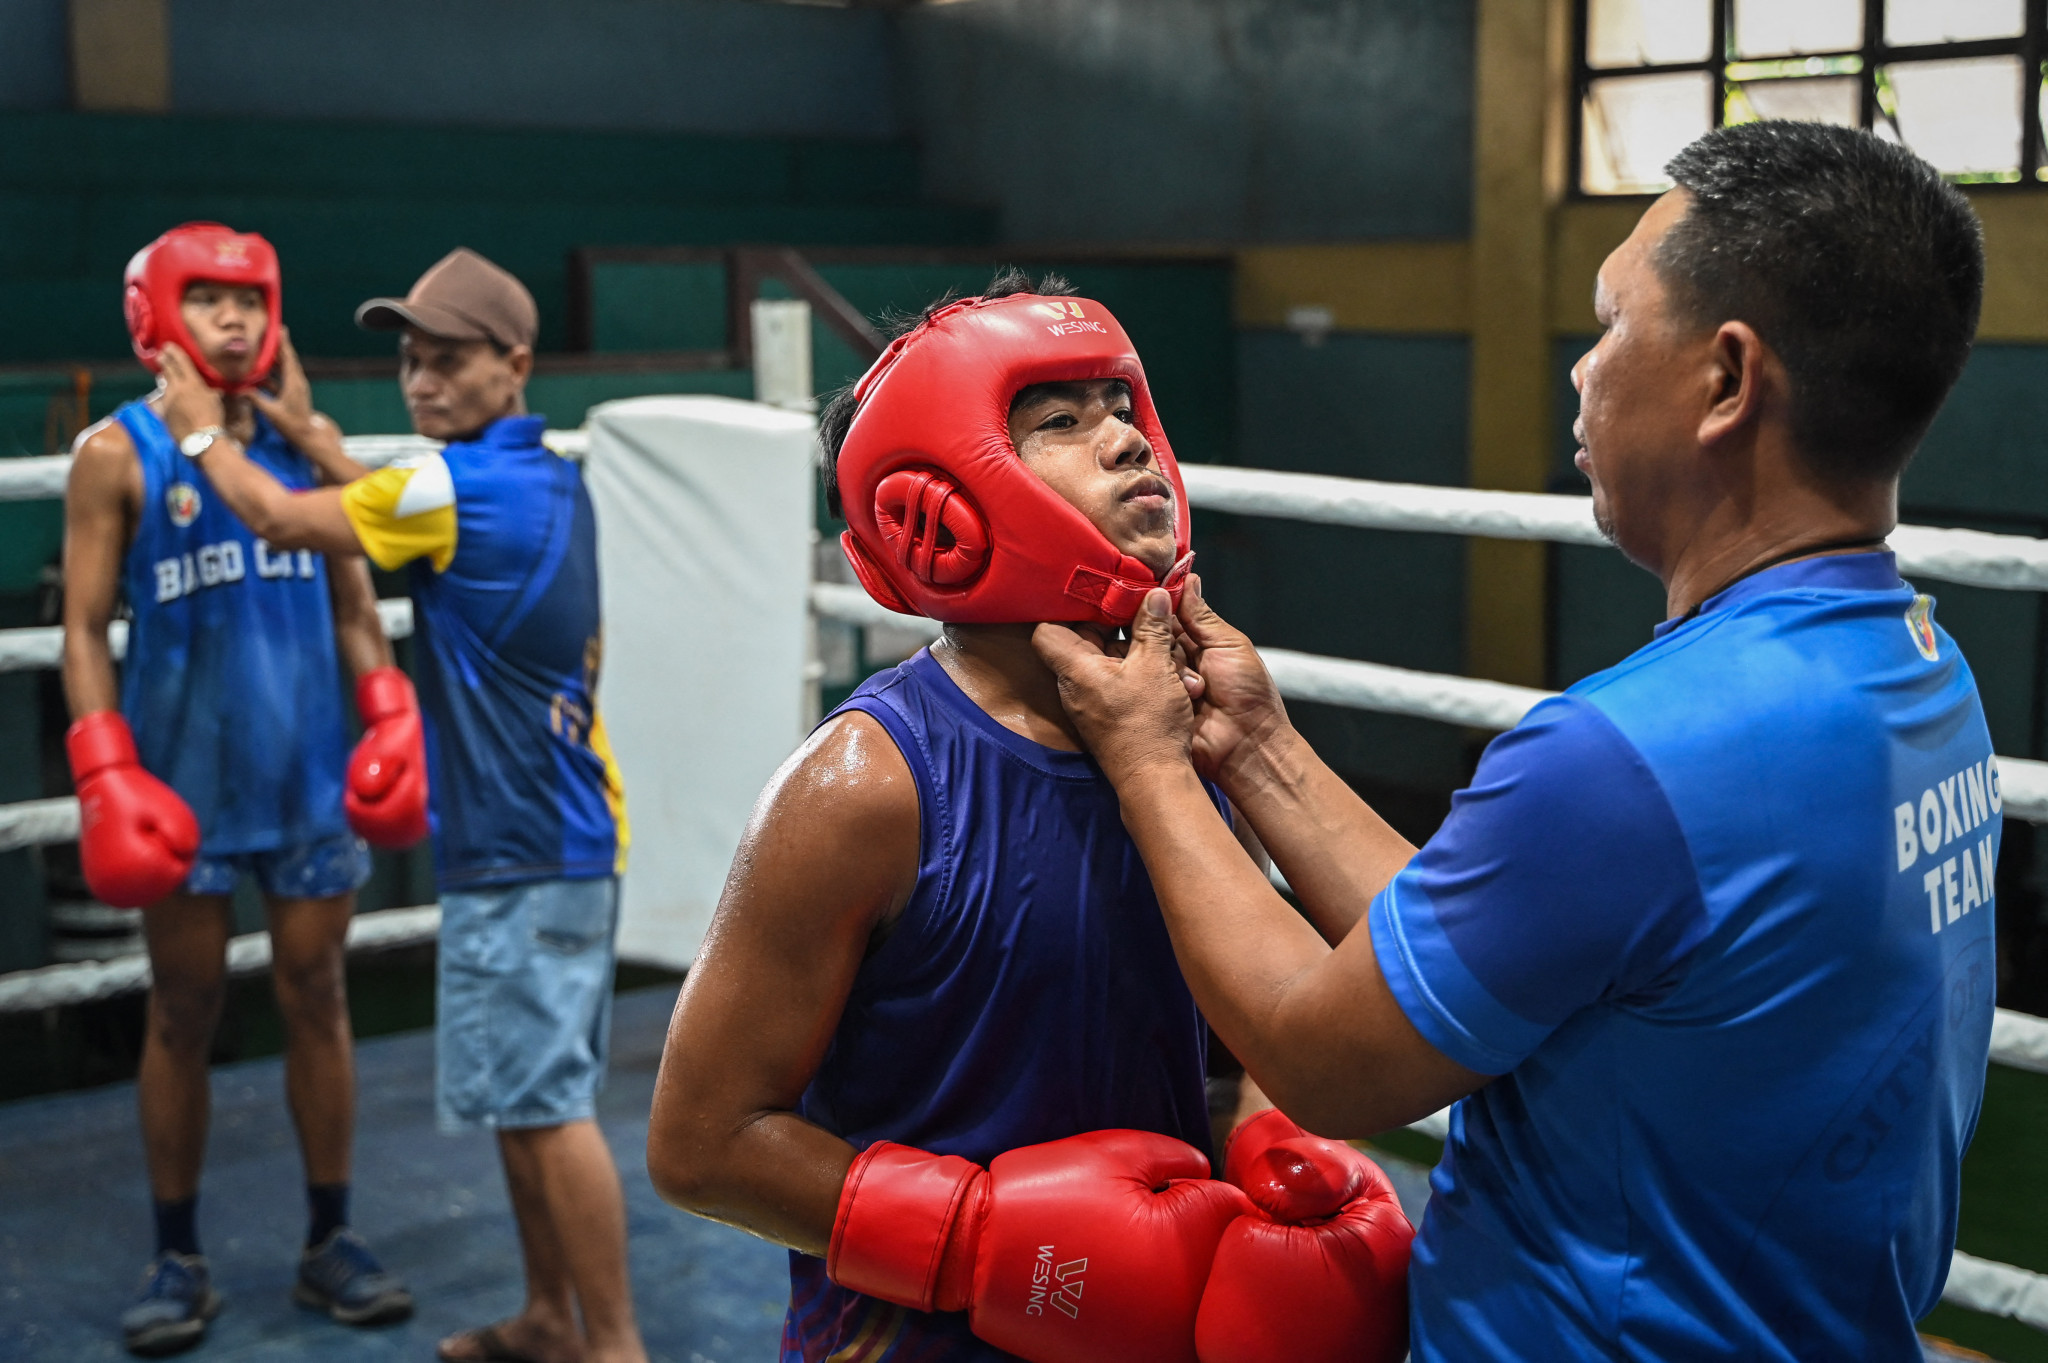 A gym in the Philippines stands at the forefront of producing Olympic boxing talents. GETTY IMAGES